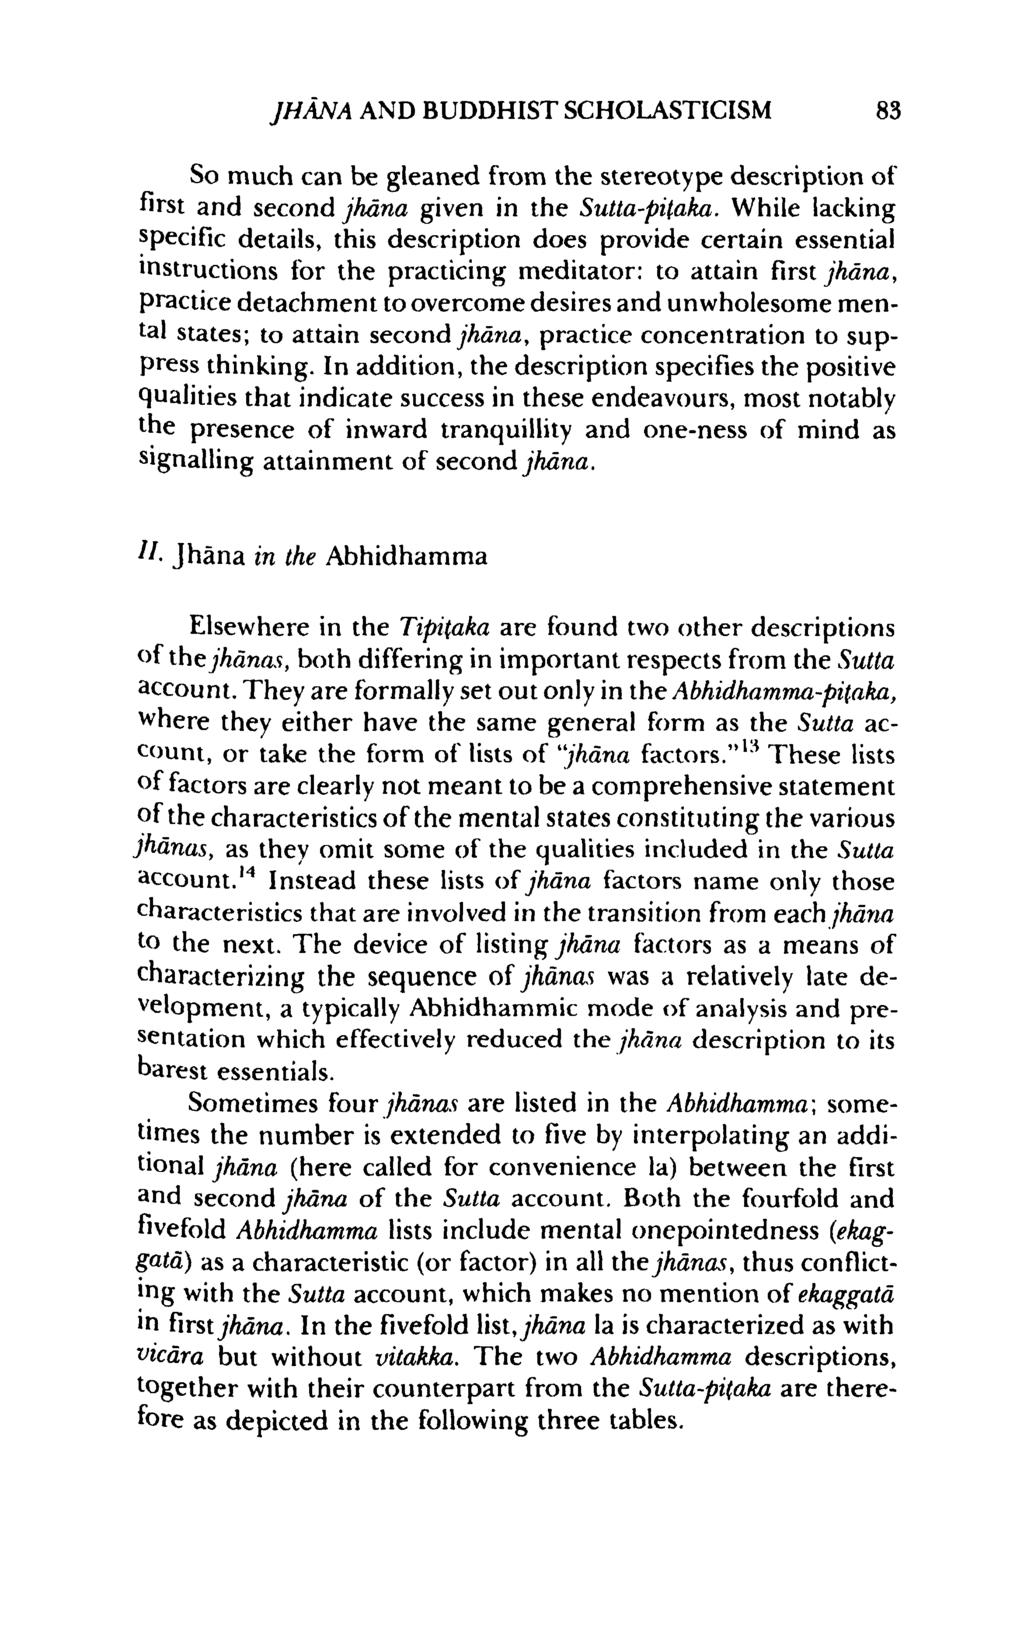 JHANA AND BUDDHIST SCHOLASTICISM 83 So much can be gleaned from the stereotype description of first and second jhdna given in the Sutta-pitaka.